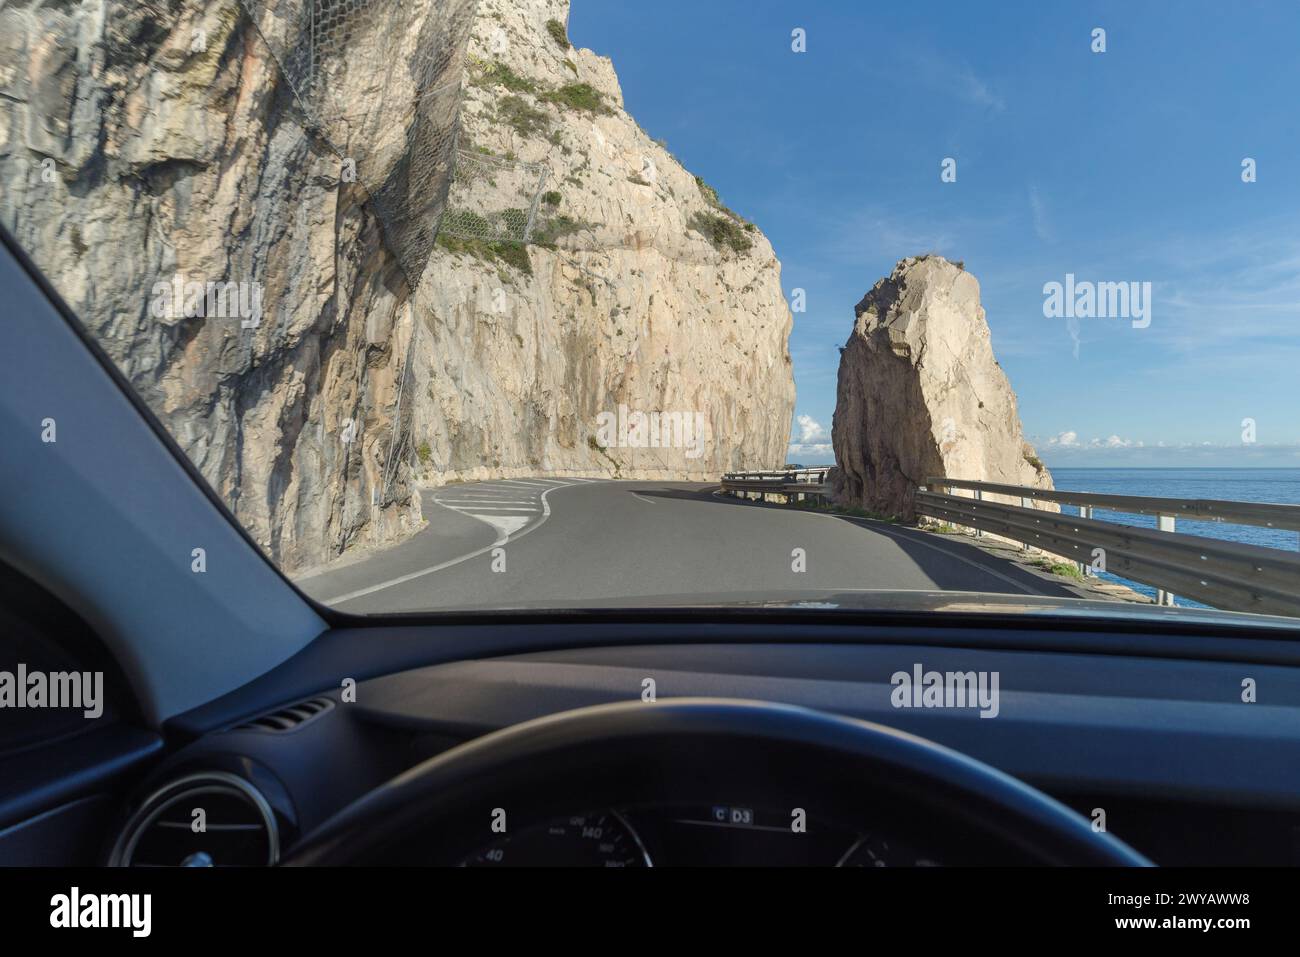 Seen from inside the car the stunning high altitude cliffside road along the coastline of Liguria, Italy Stock Photo